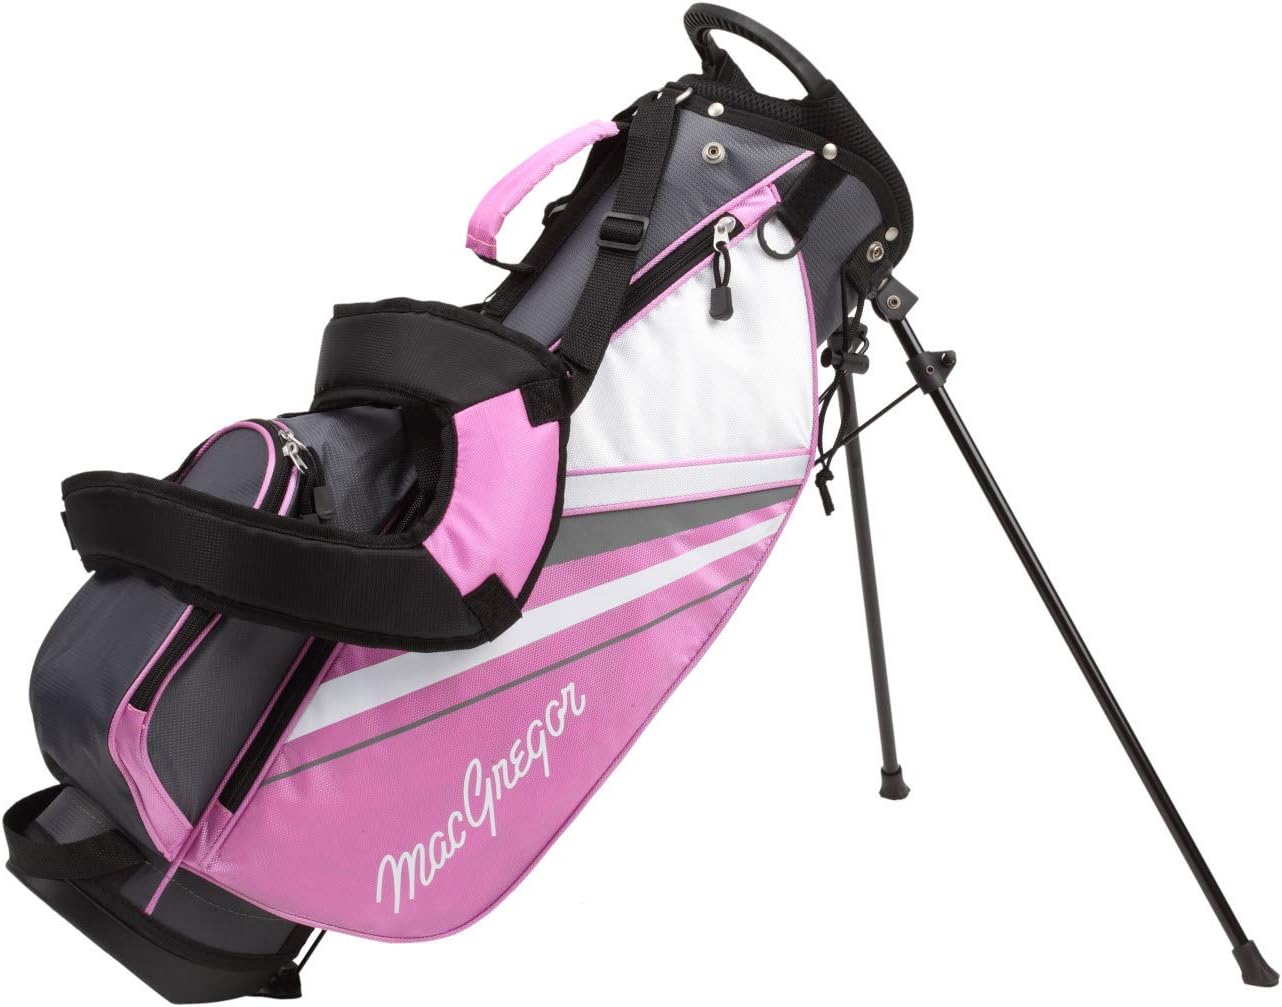 MacGregor Golf DCT3000 Boys Girls Junior Kids Childrens Golf Club Package Set with Golf Club Carry Bag - fitnessterapy